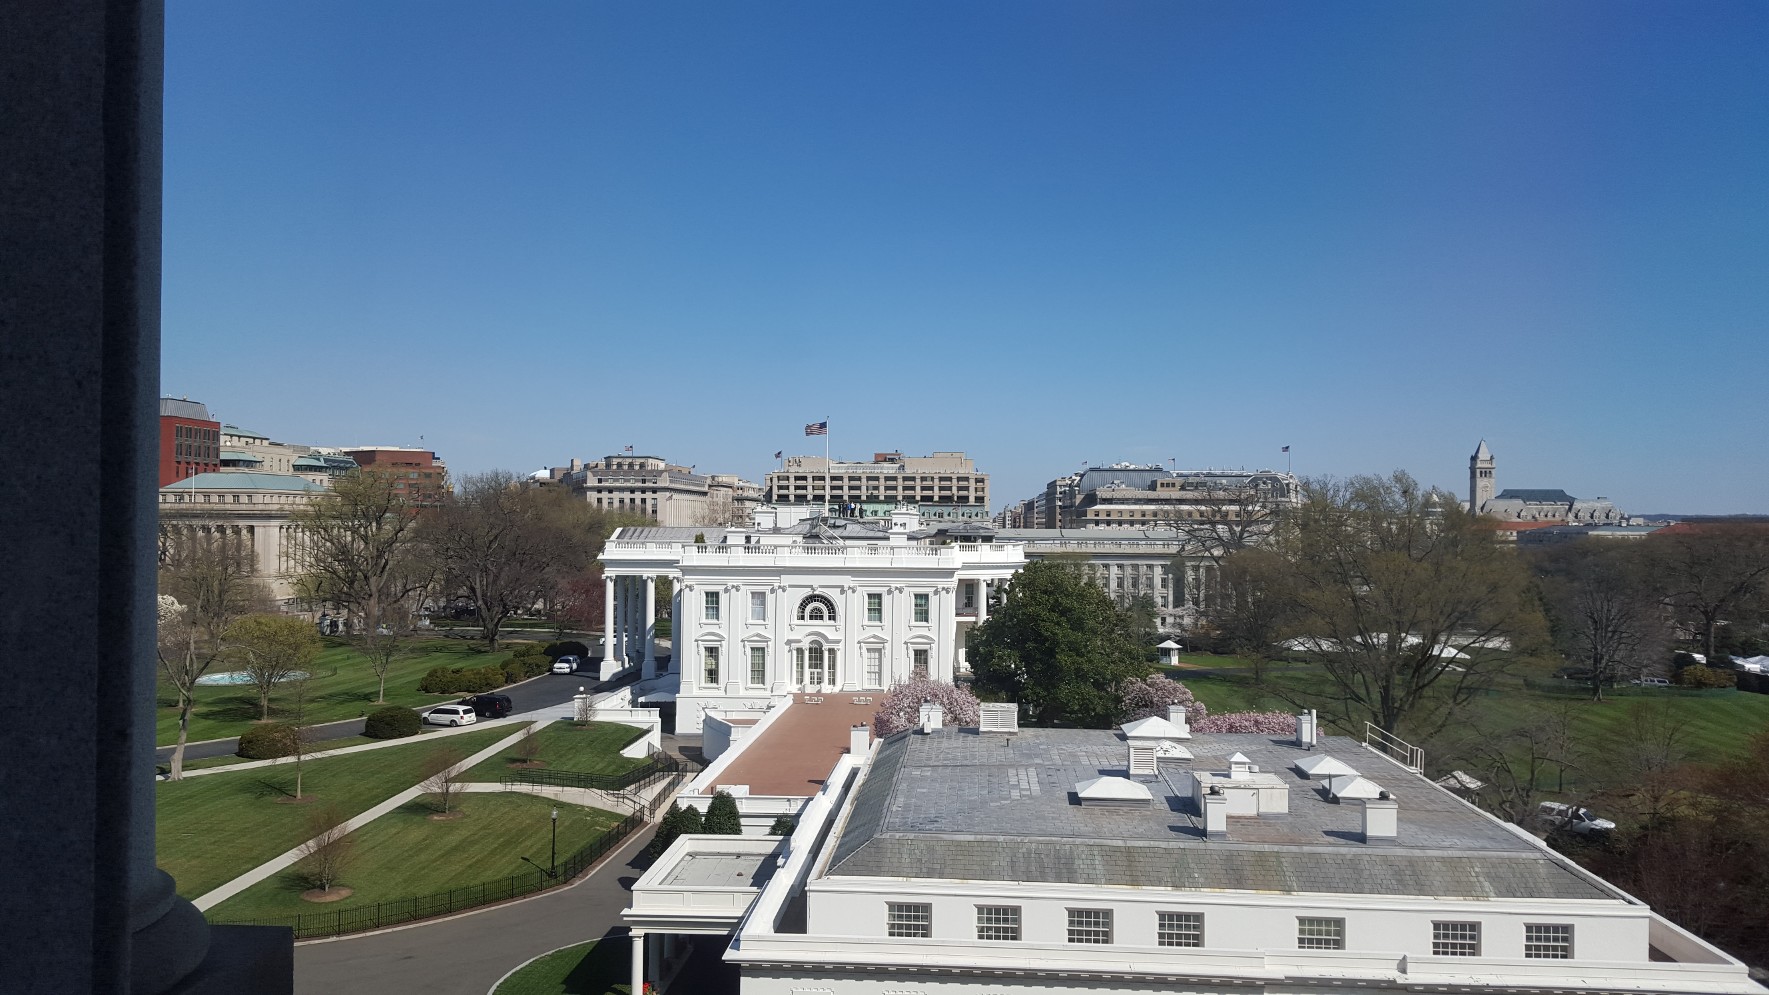 Figure 2: The White House (West Wing in foreground), as seen from the Eisenhower Executive Office Building.